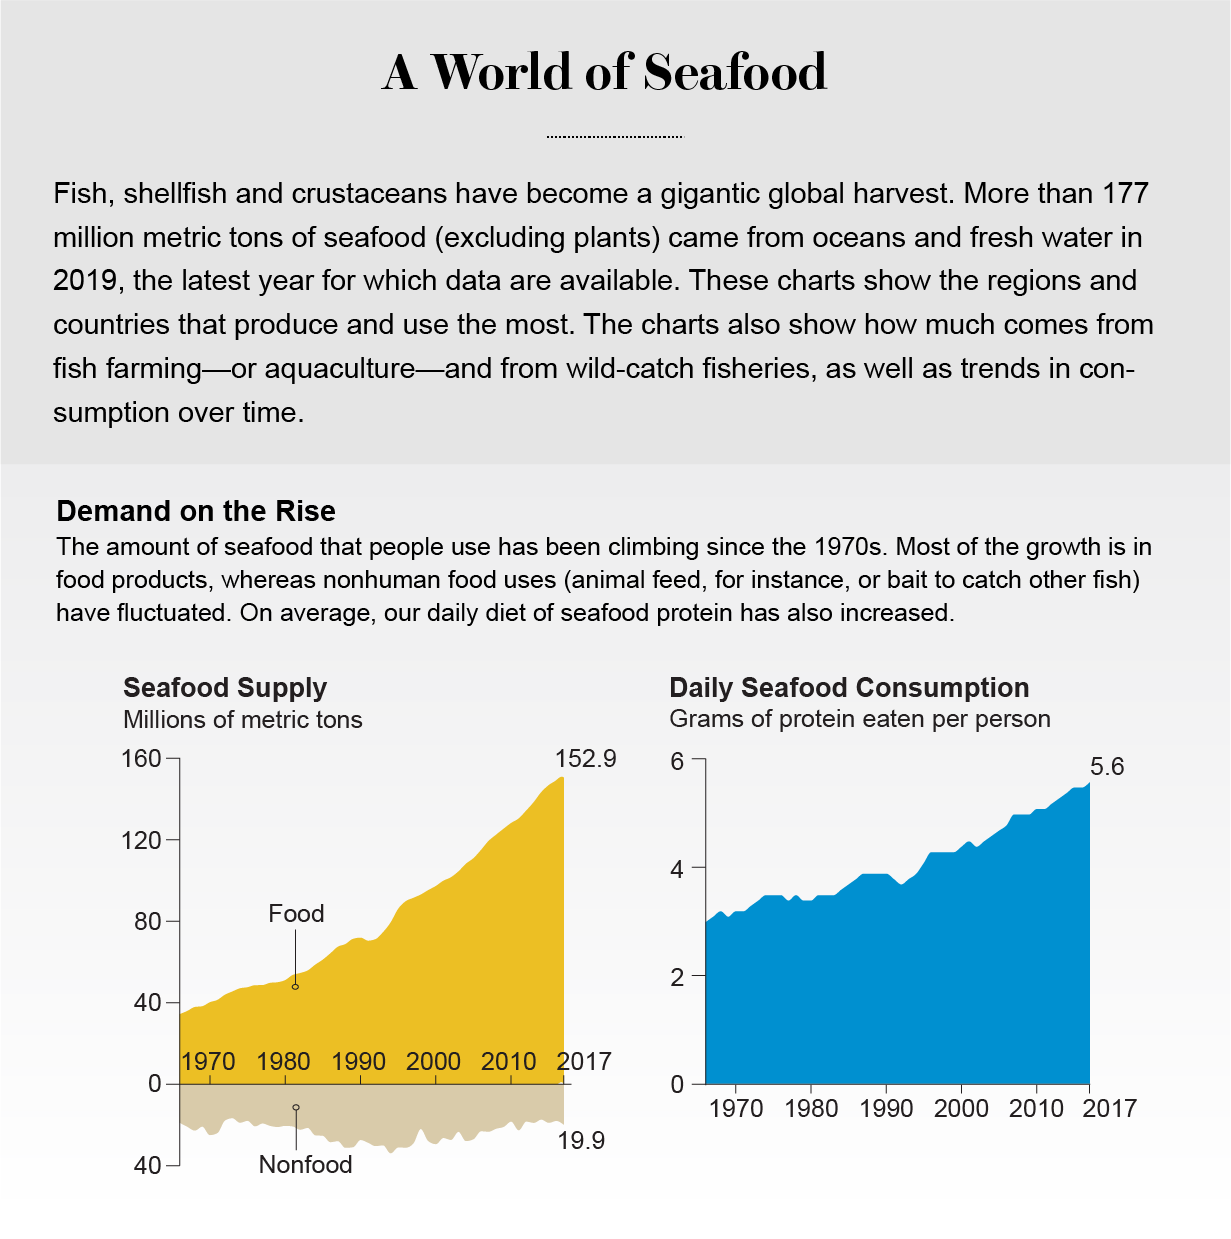 Area charts show global seafood supply and daily seafood consumption, with both measures increasing from 1965 to 2017.